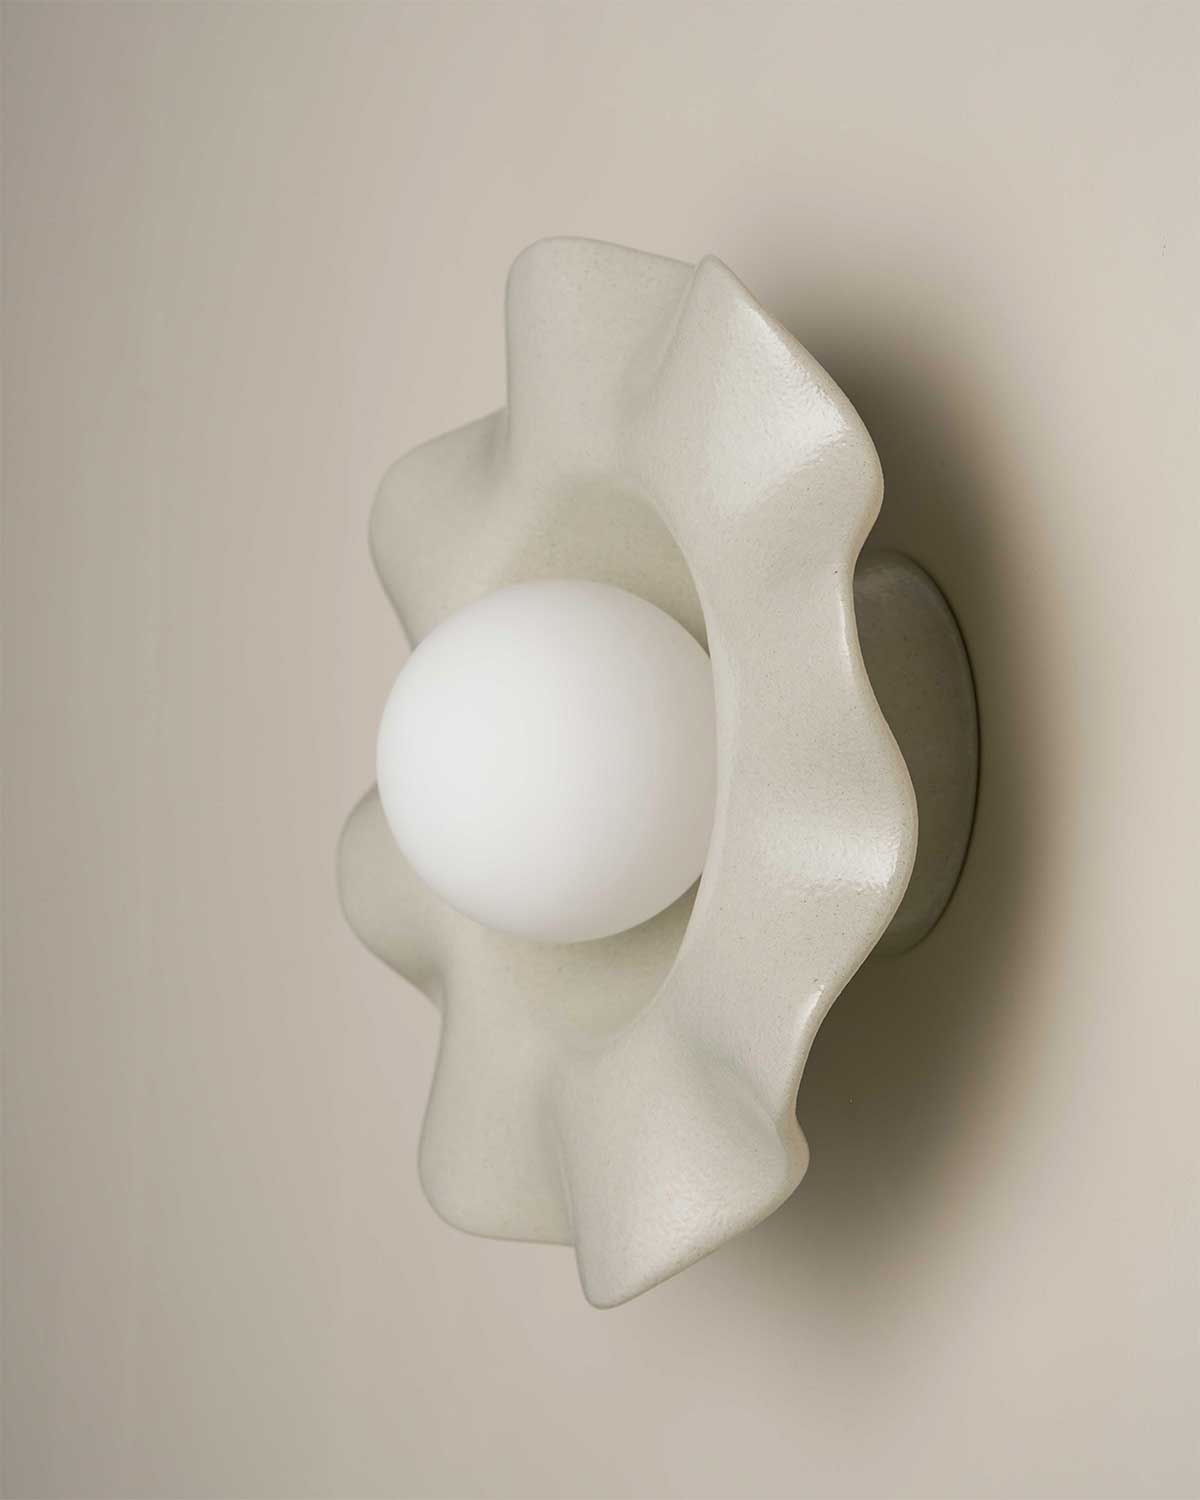 Ceramic Wall Pearl Sconce Light / Shale